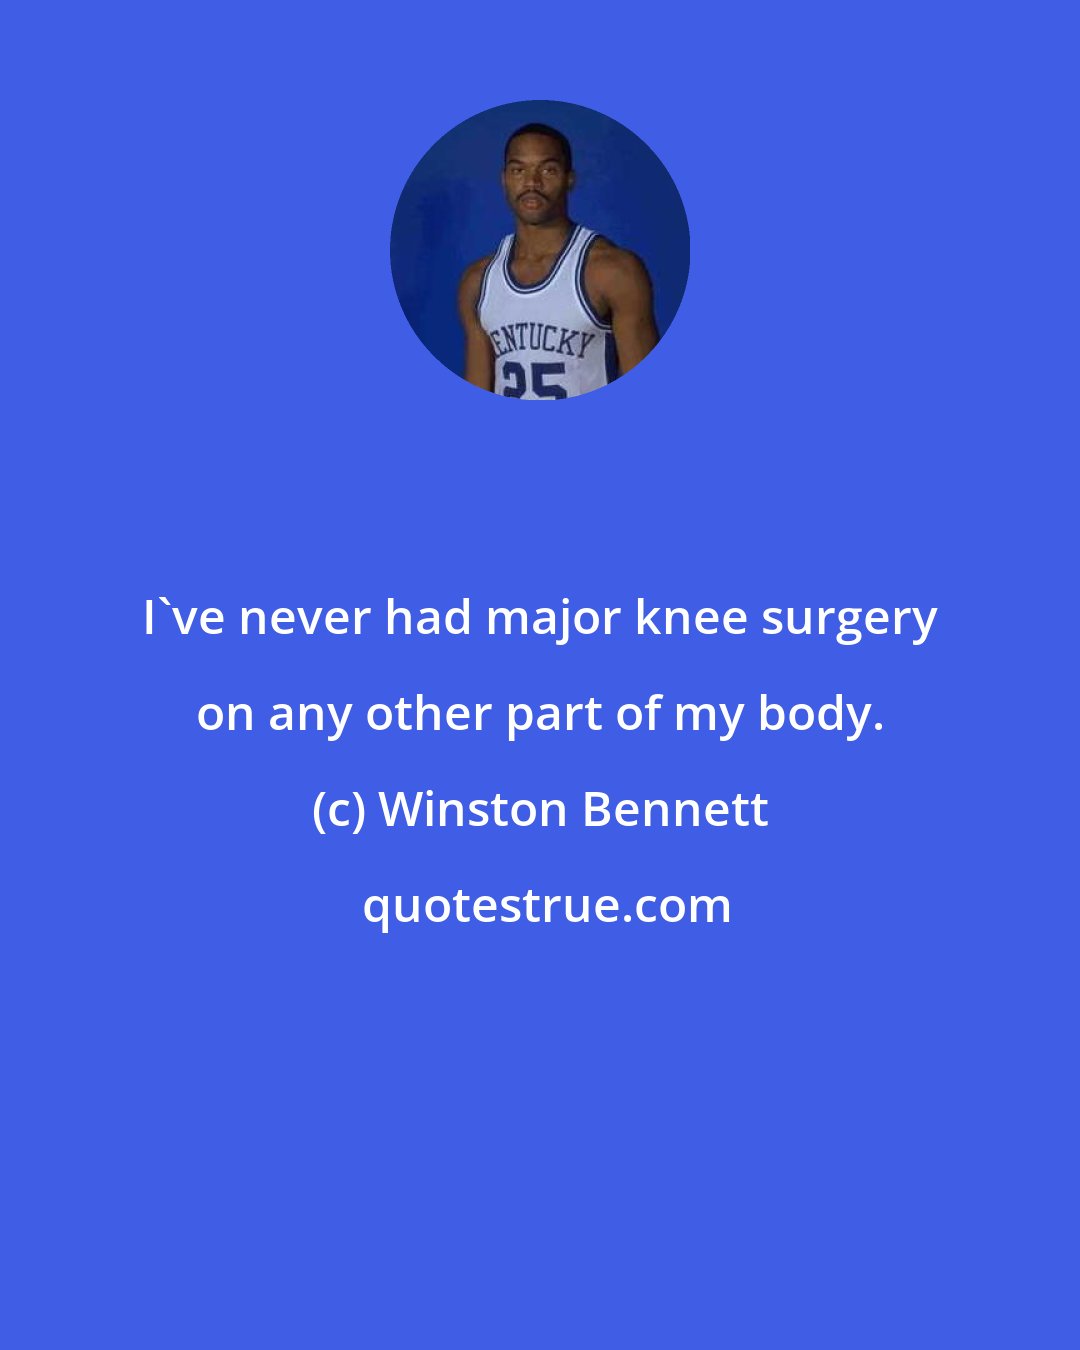 Winston Bennett: I've never had major knee surgery on any other part of my body.